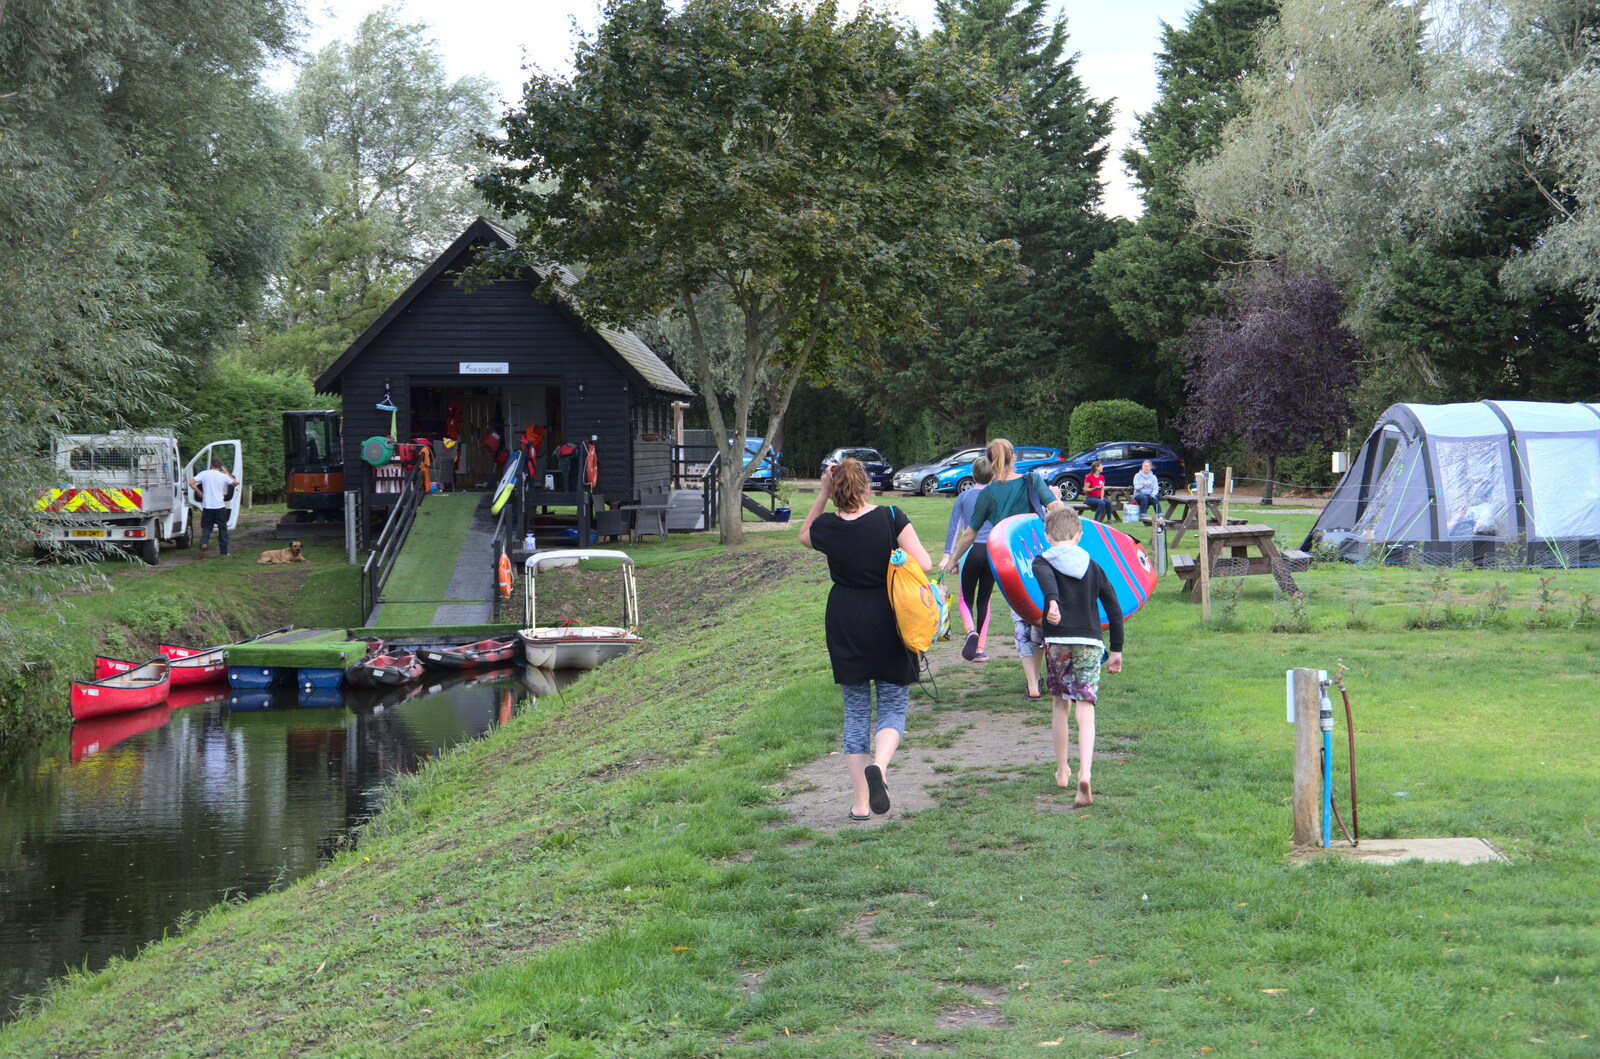 Camping at Three Rivers, Geldeston, Norfolk - 5th September 2020: We head off to the boat hire shed